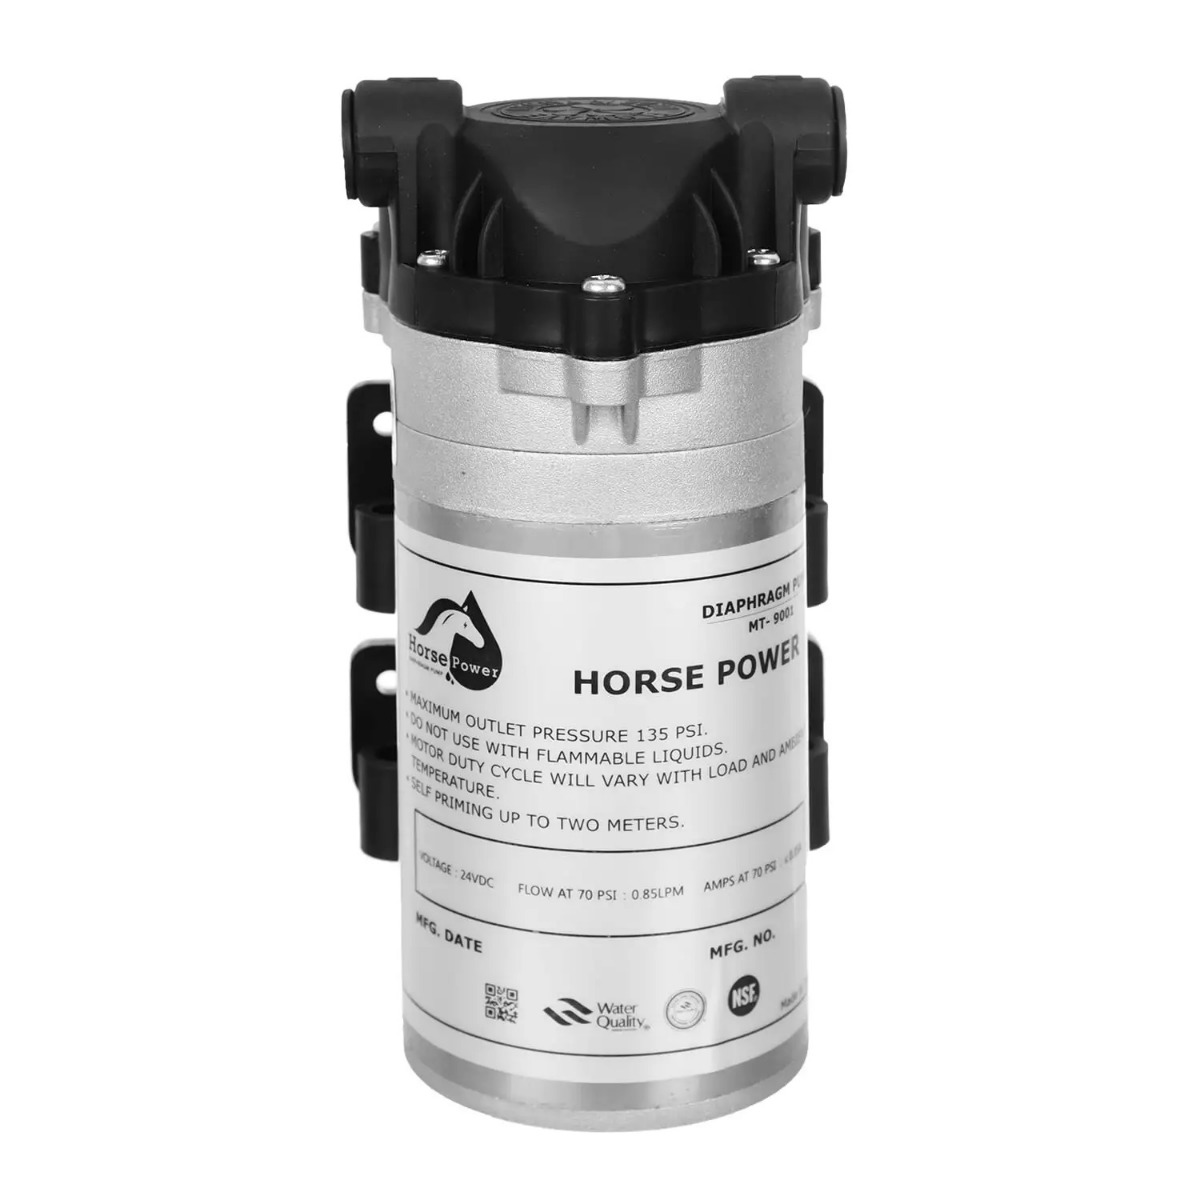 Horse Power Water Pump, 24V, Silver - MT-9001